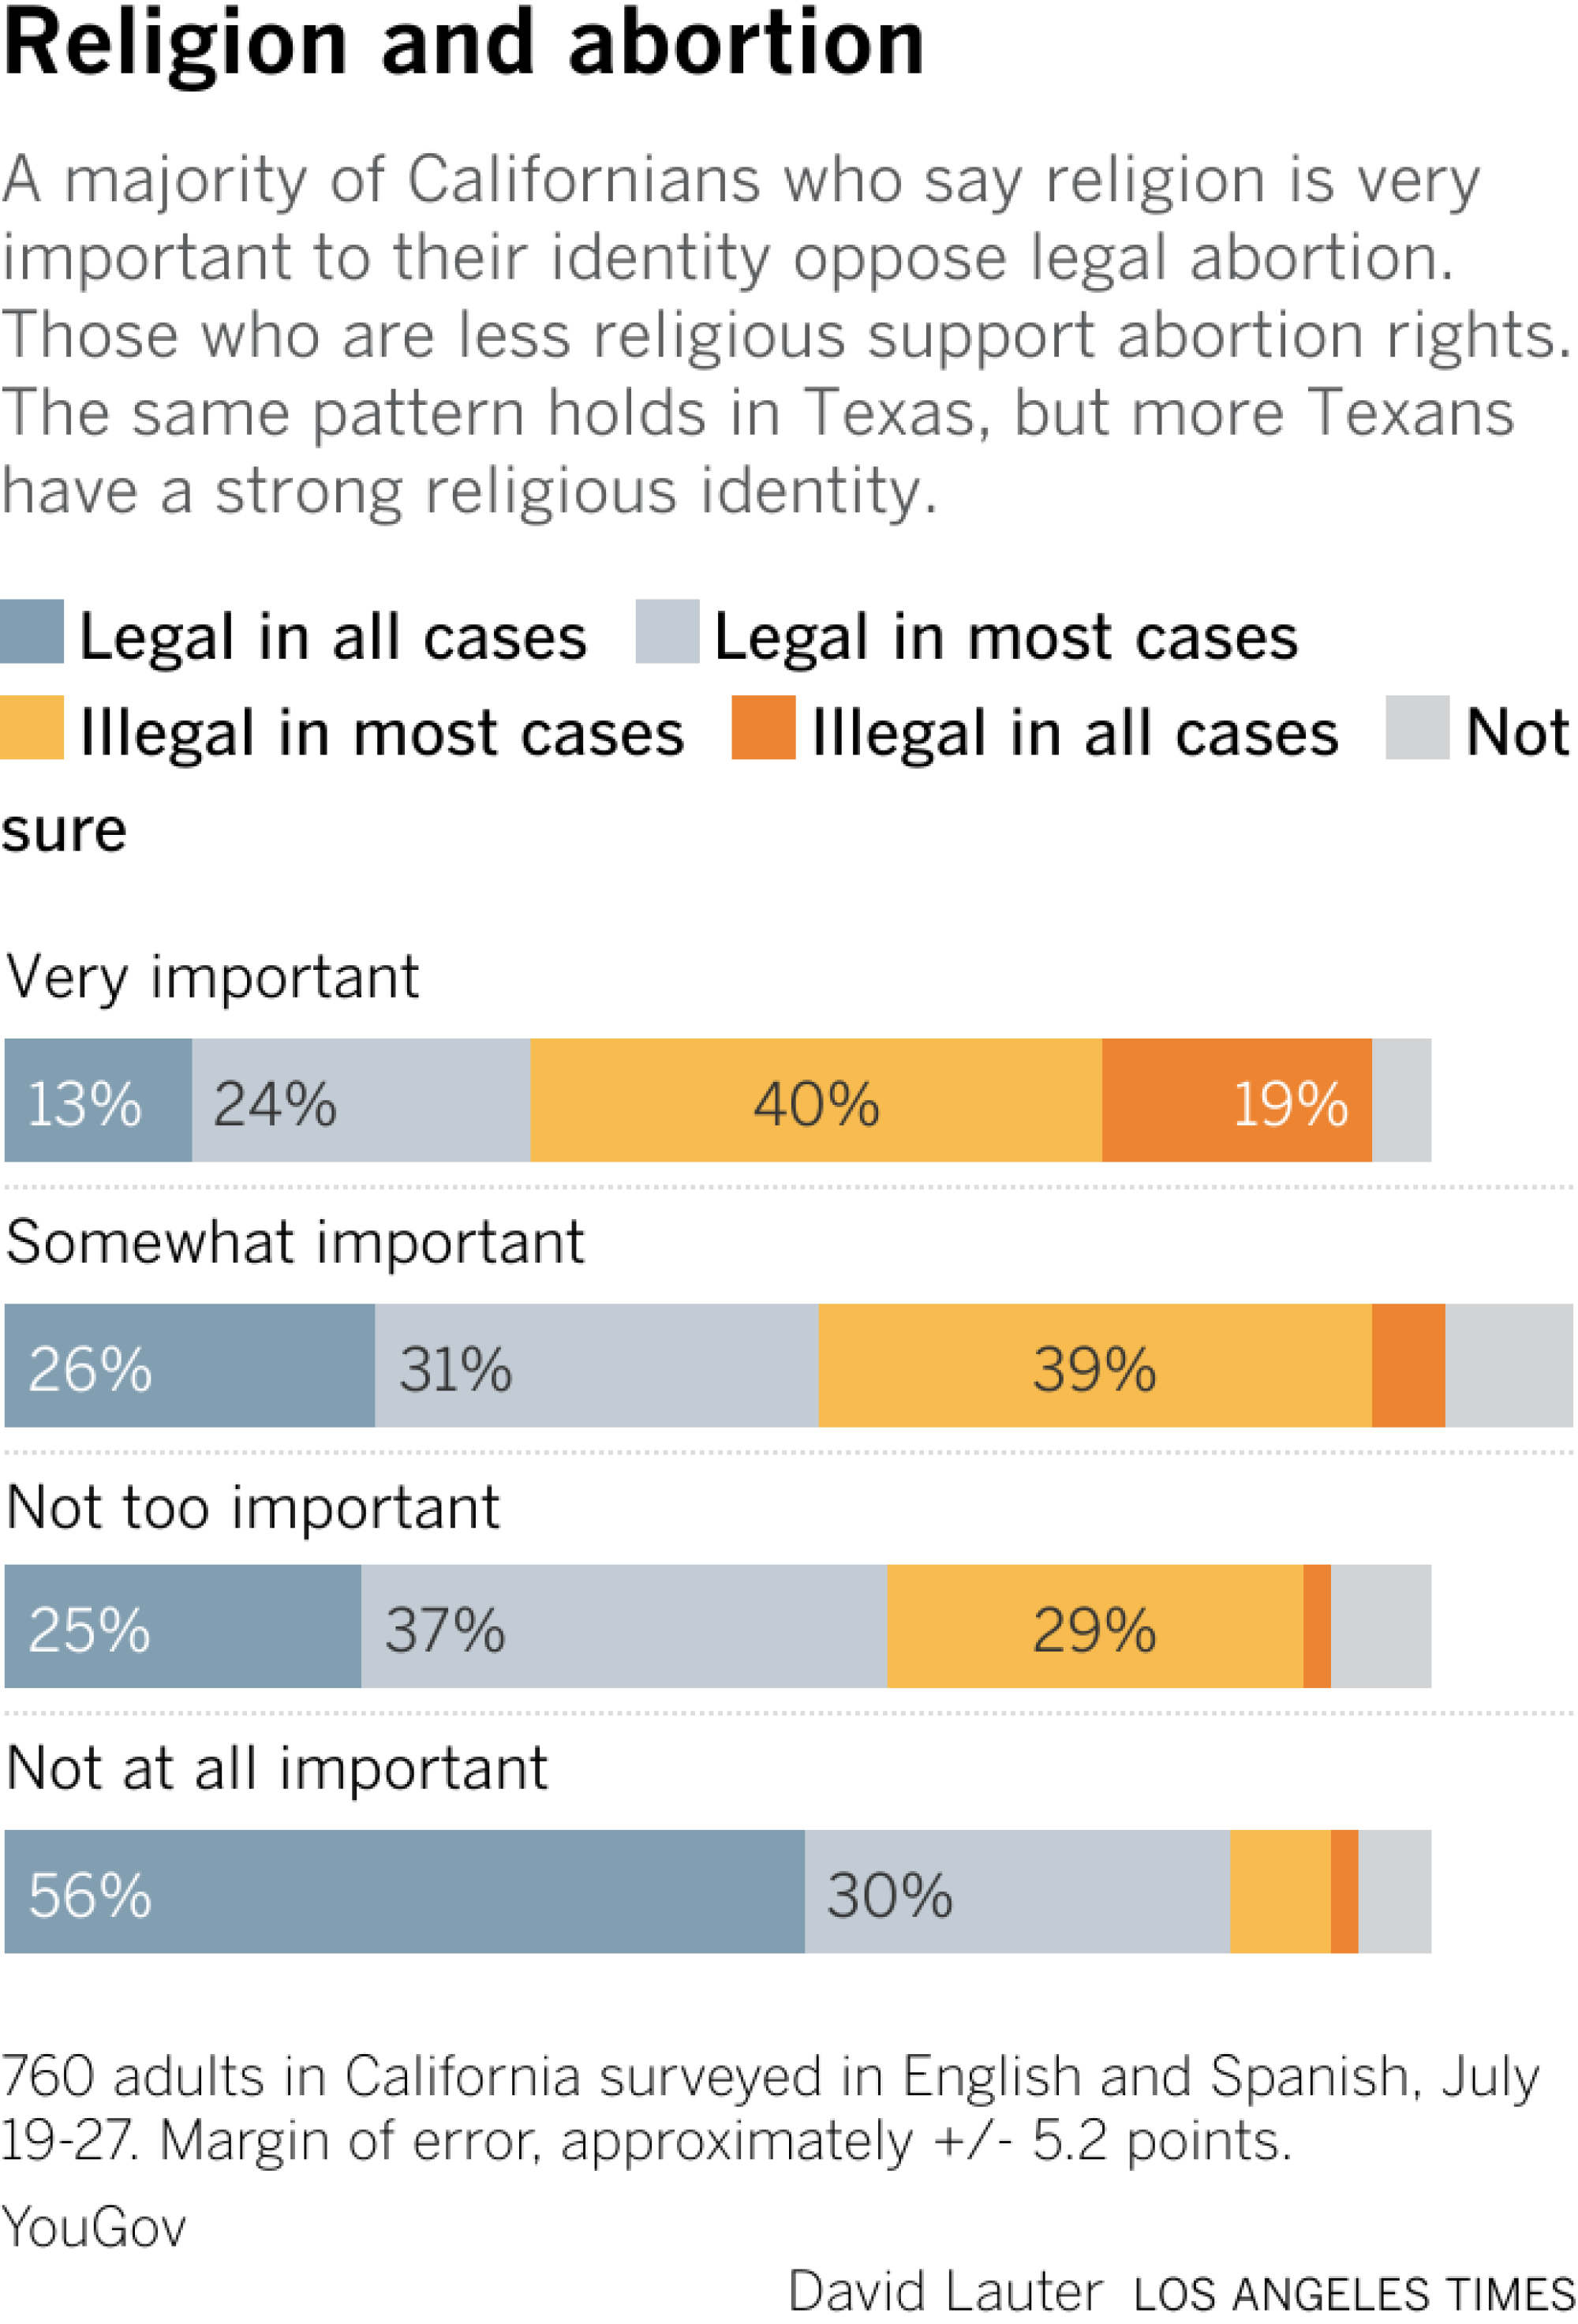 A majority of Californians who say religion is very important to their identity oppose legal abortion. Those who are less religious support abortion rights. The same pattern holds in Texas, but more Texans have a strong religious identity.